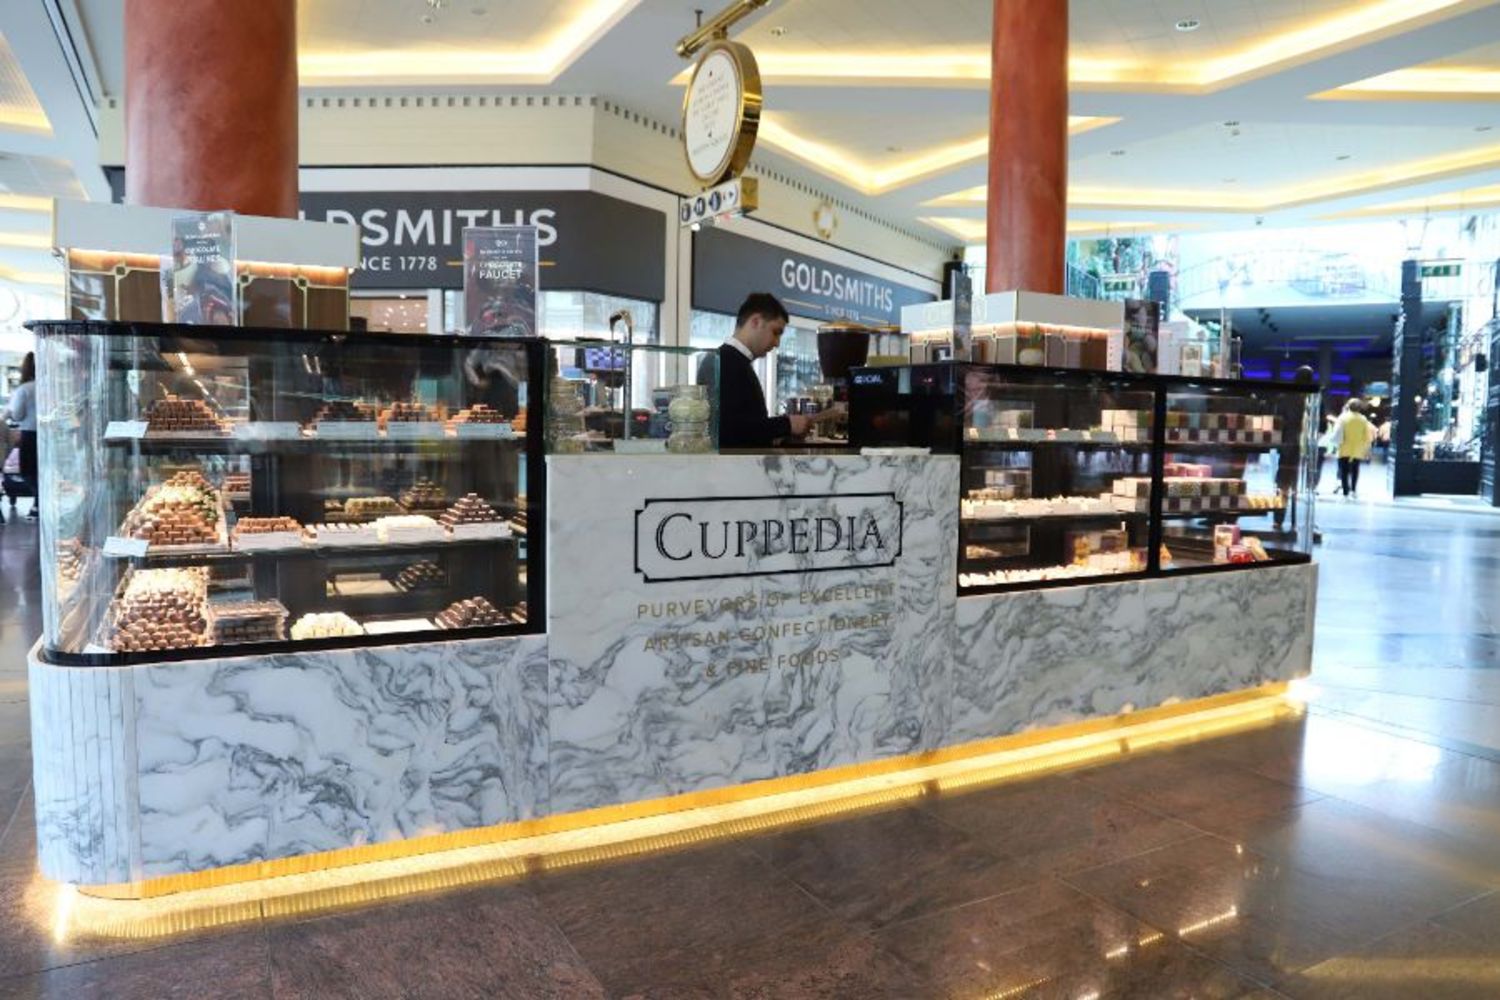 Commercial patisserie island stand, sold on behalf of a high end patisserie company who traded in the trafford centre